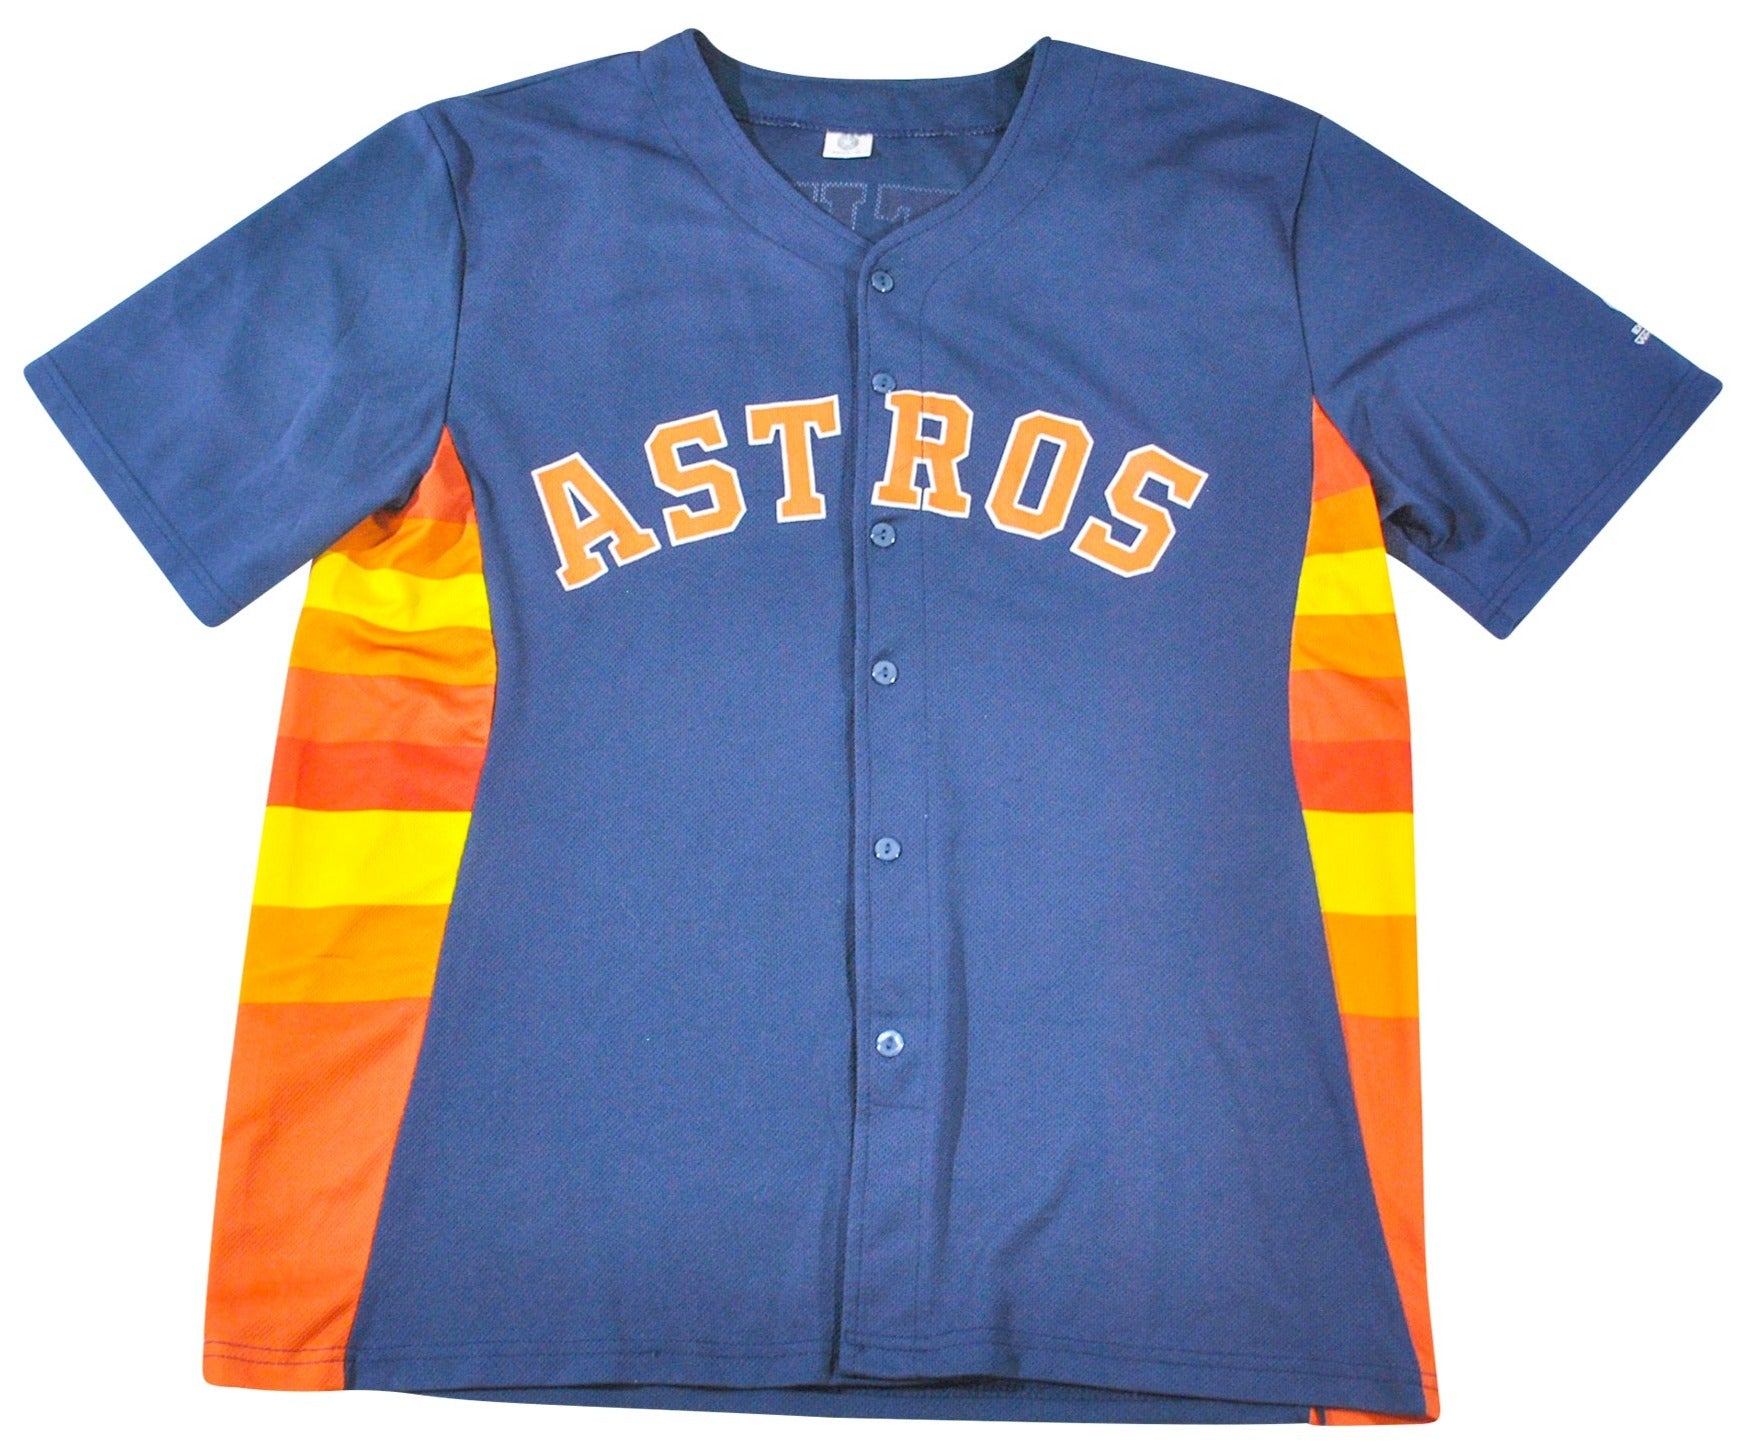 astros jersey nearby